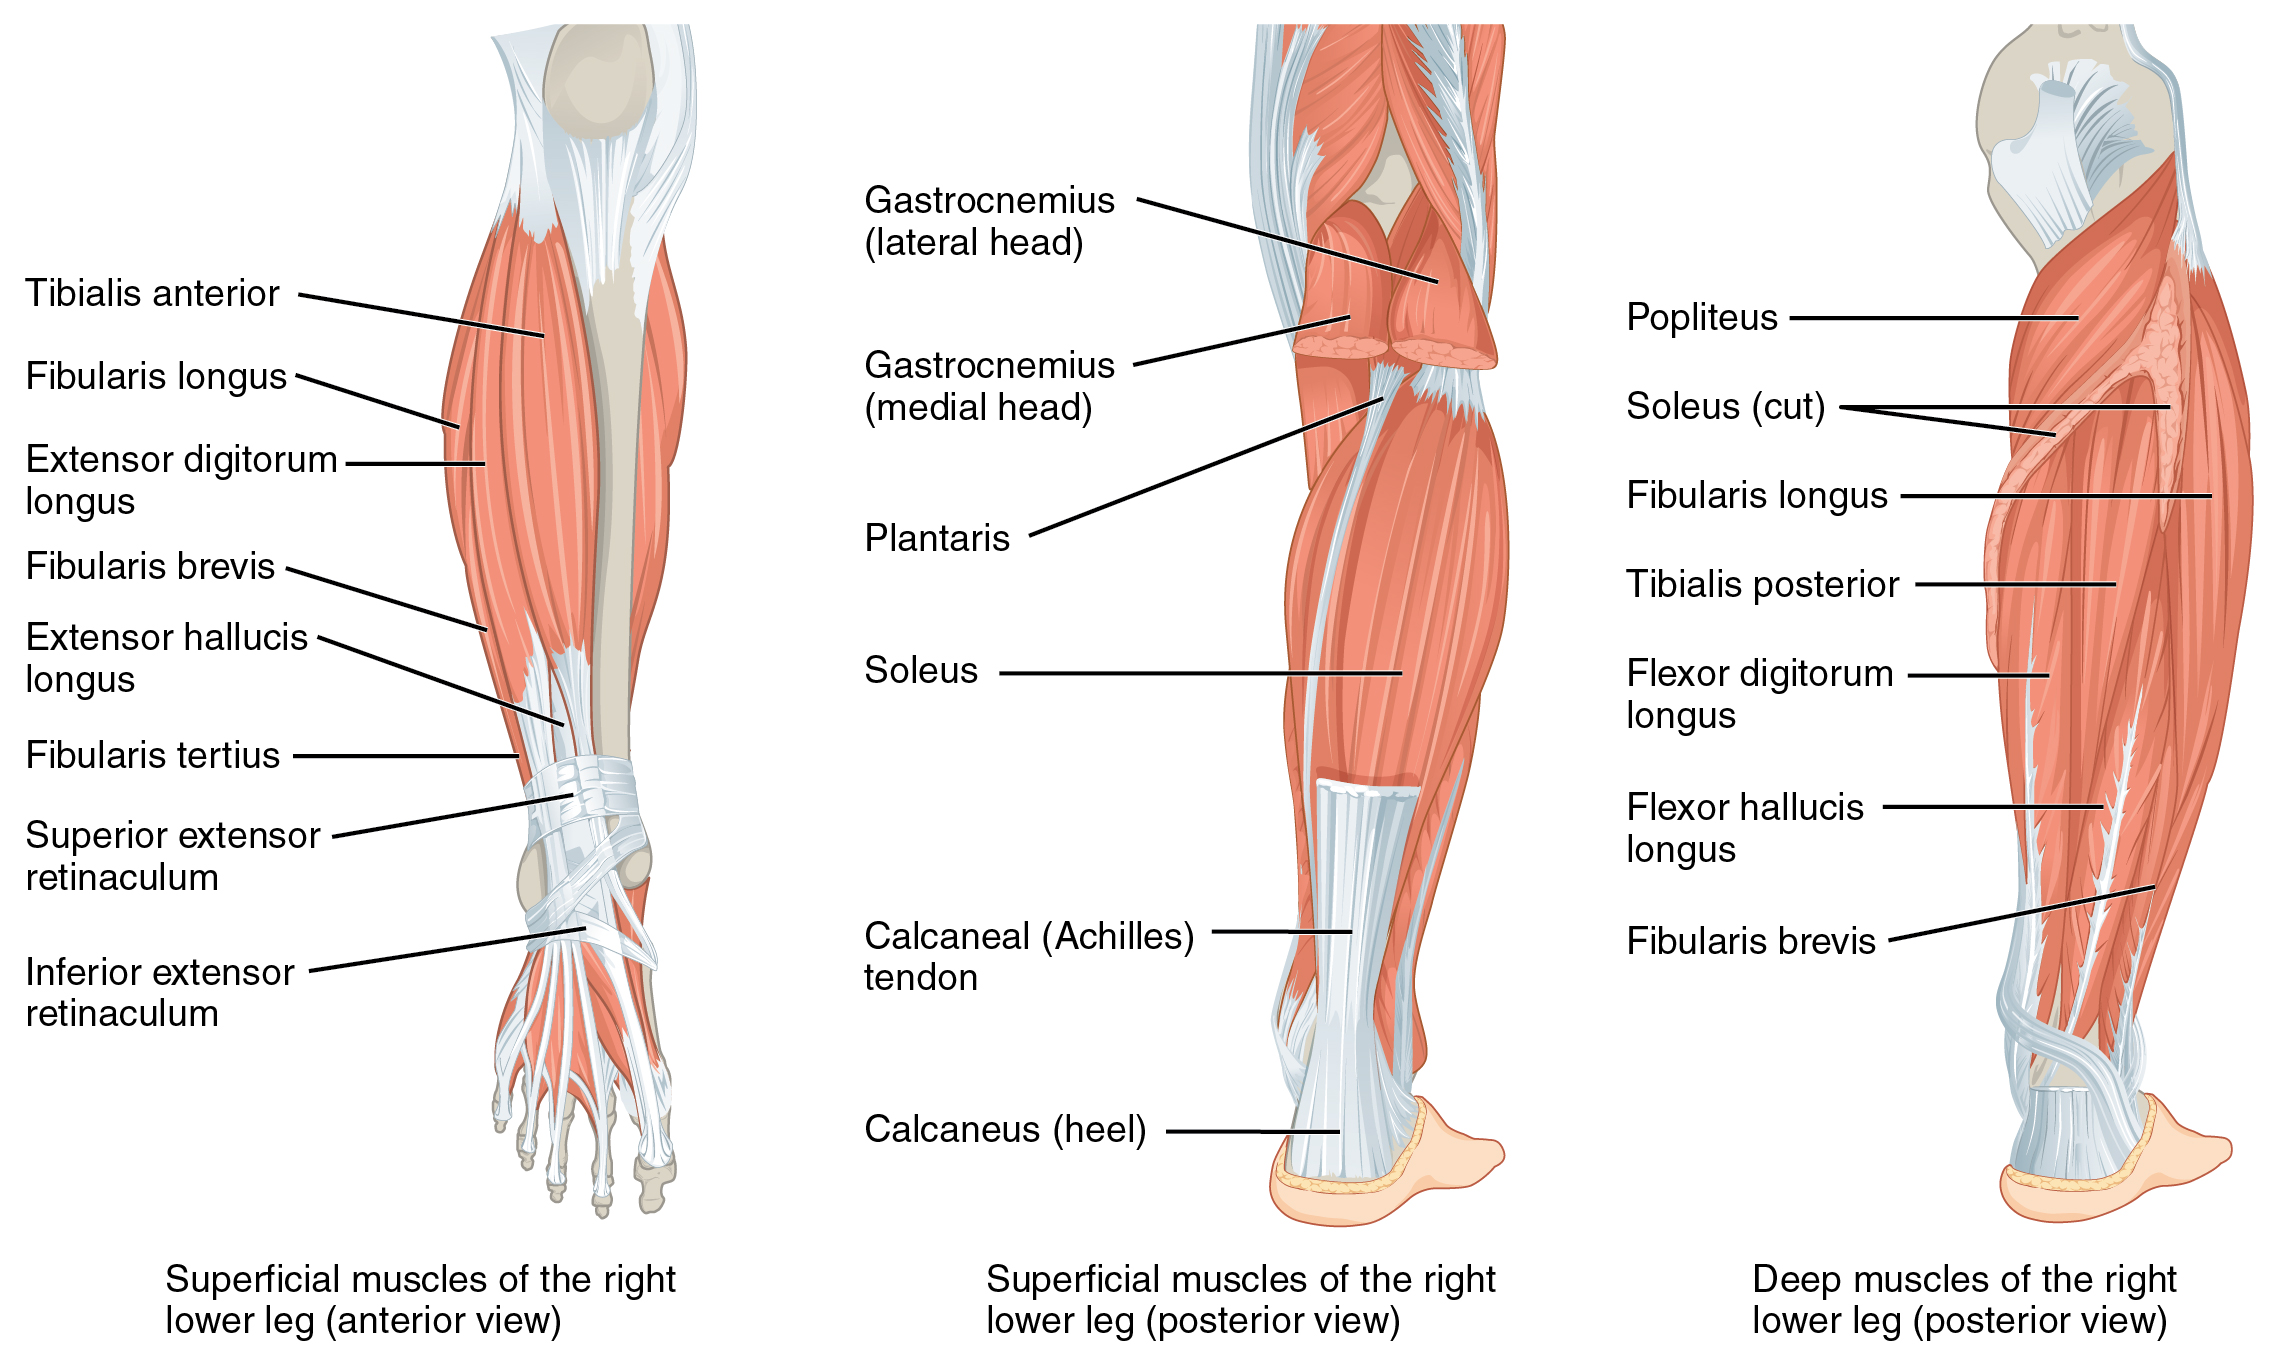 Anterior and posterior views of the superficial muscles of the right lower leg; posterior view of the deep muscles of the right lower leg.